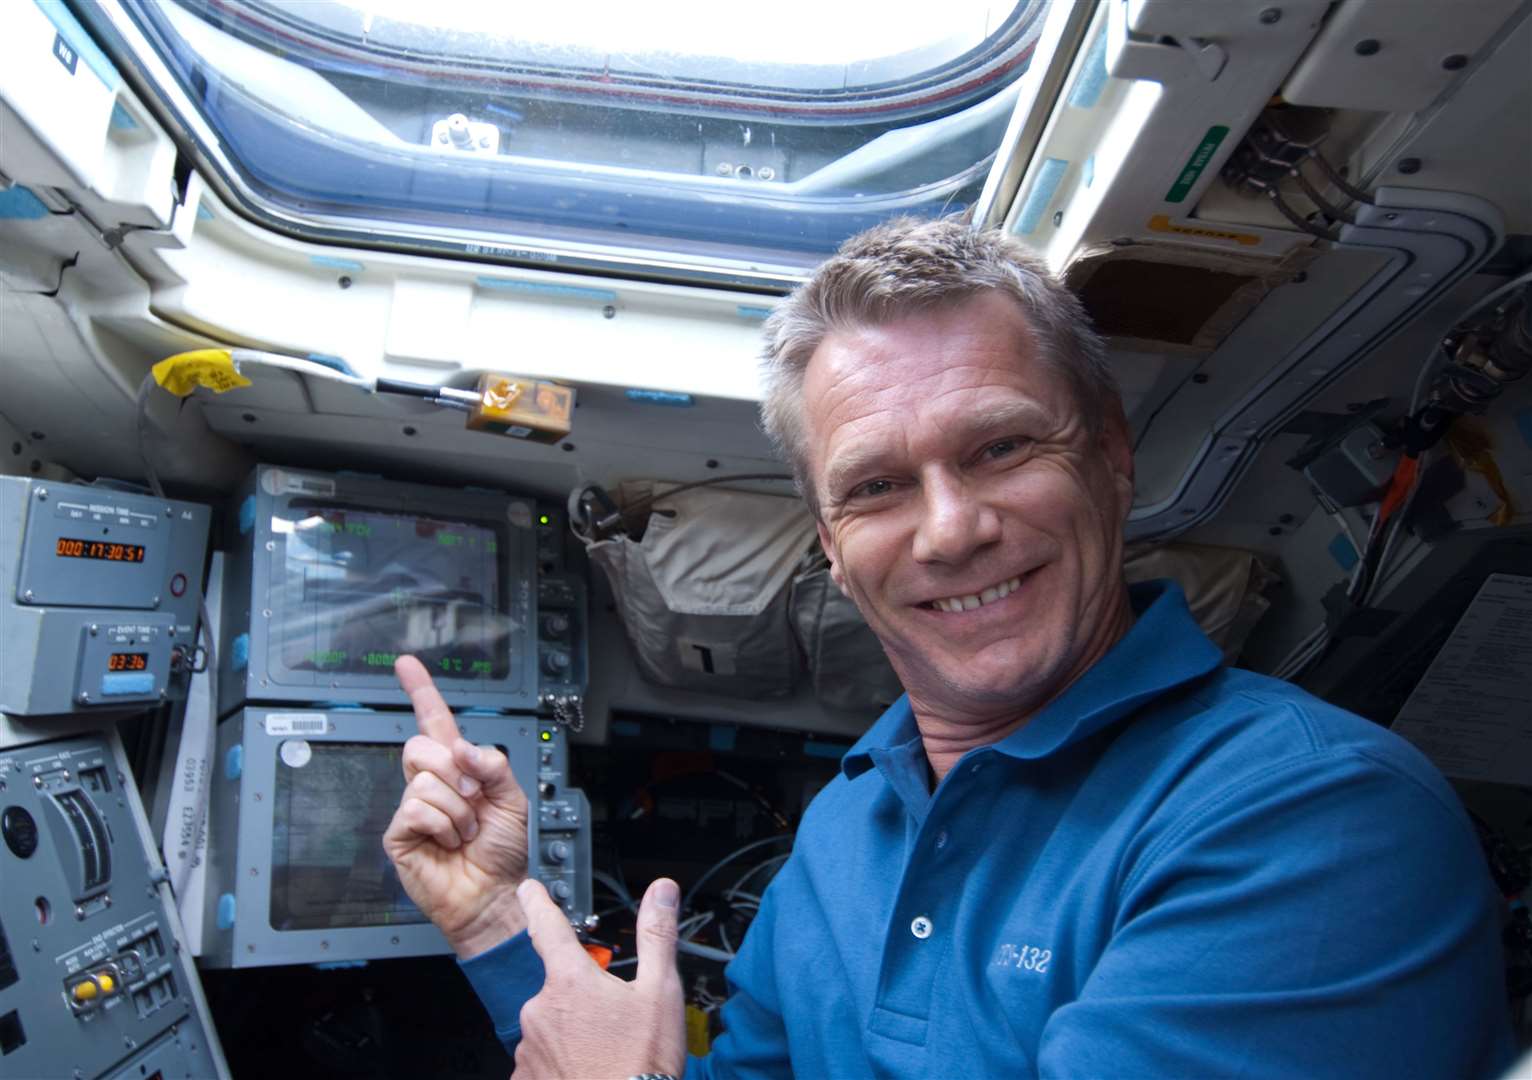 Piers Sellers on the flight deck of the space shuttle. Picture: Nasa